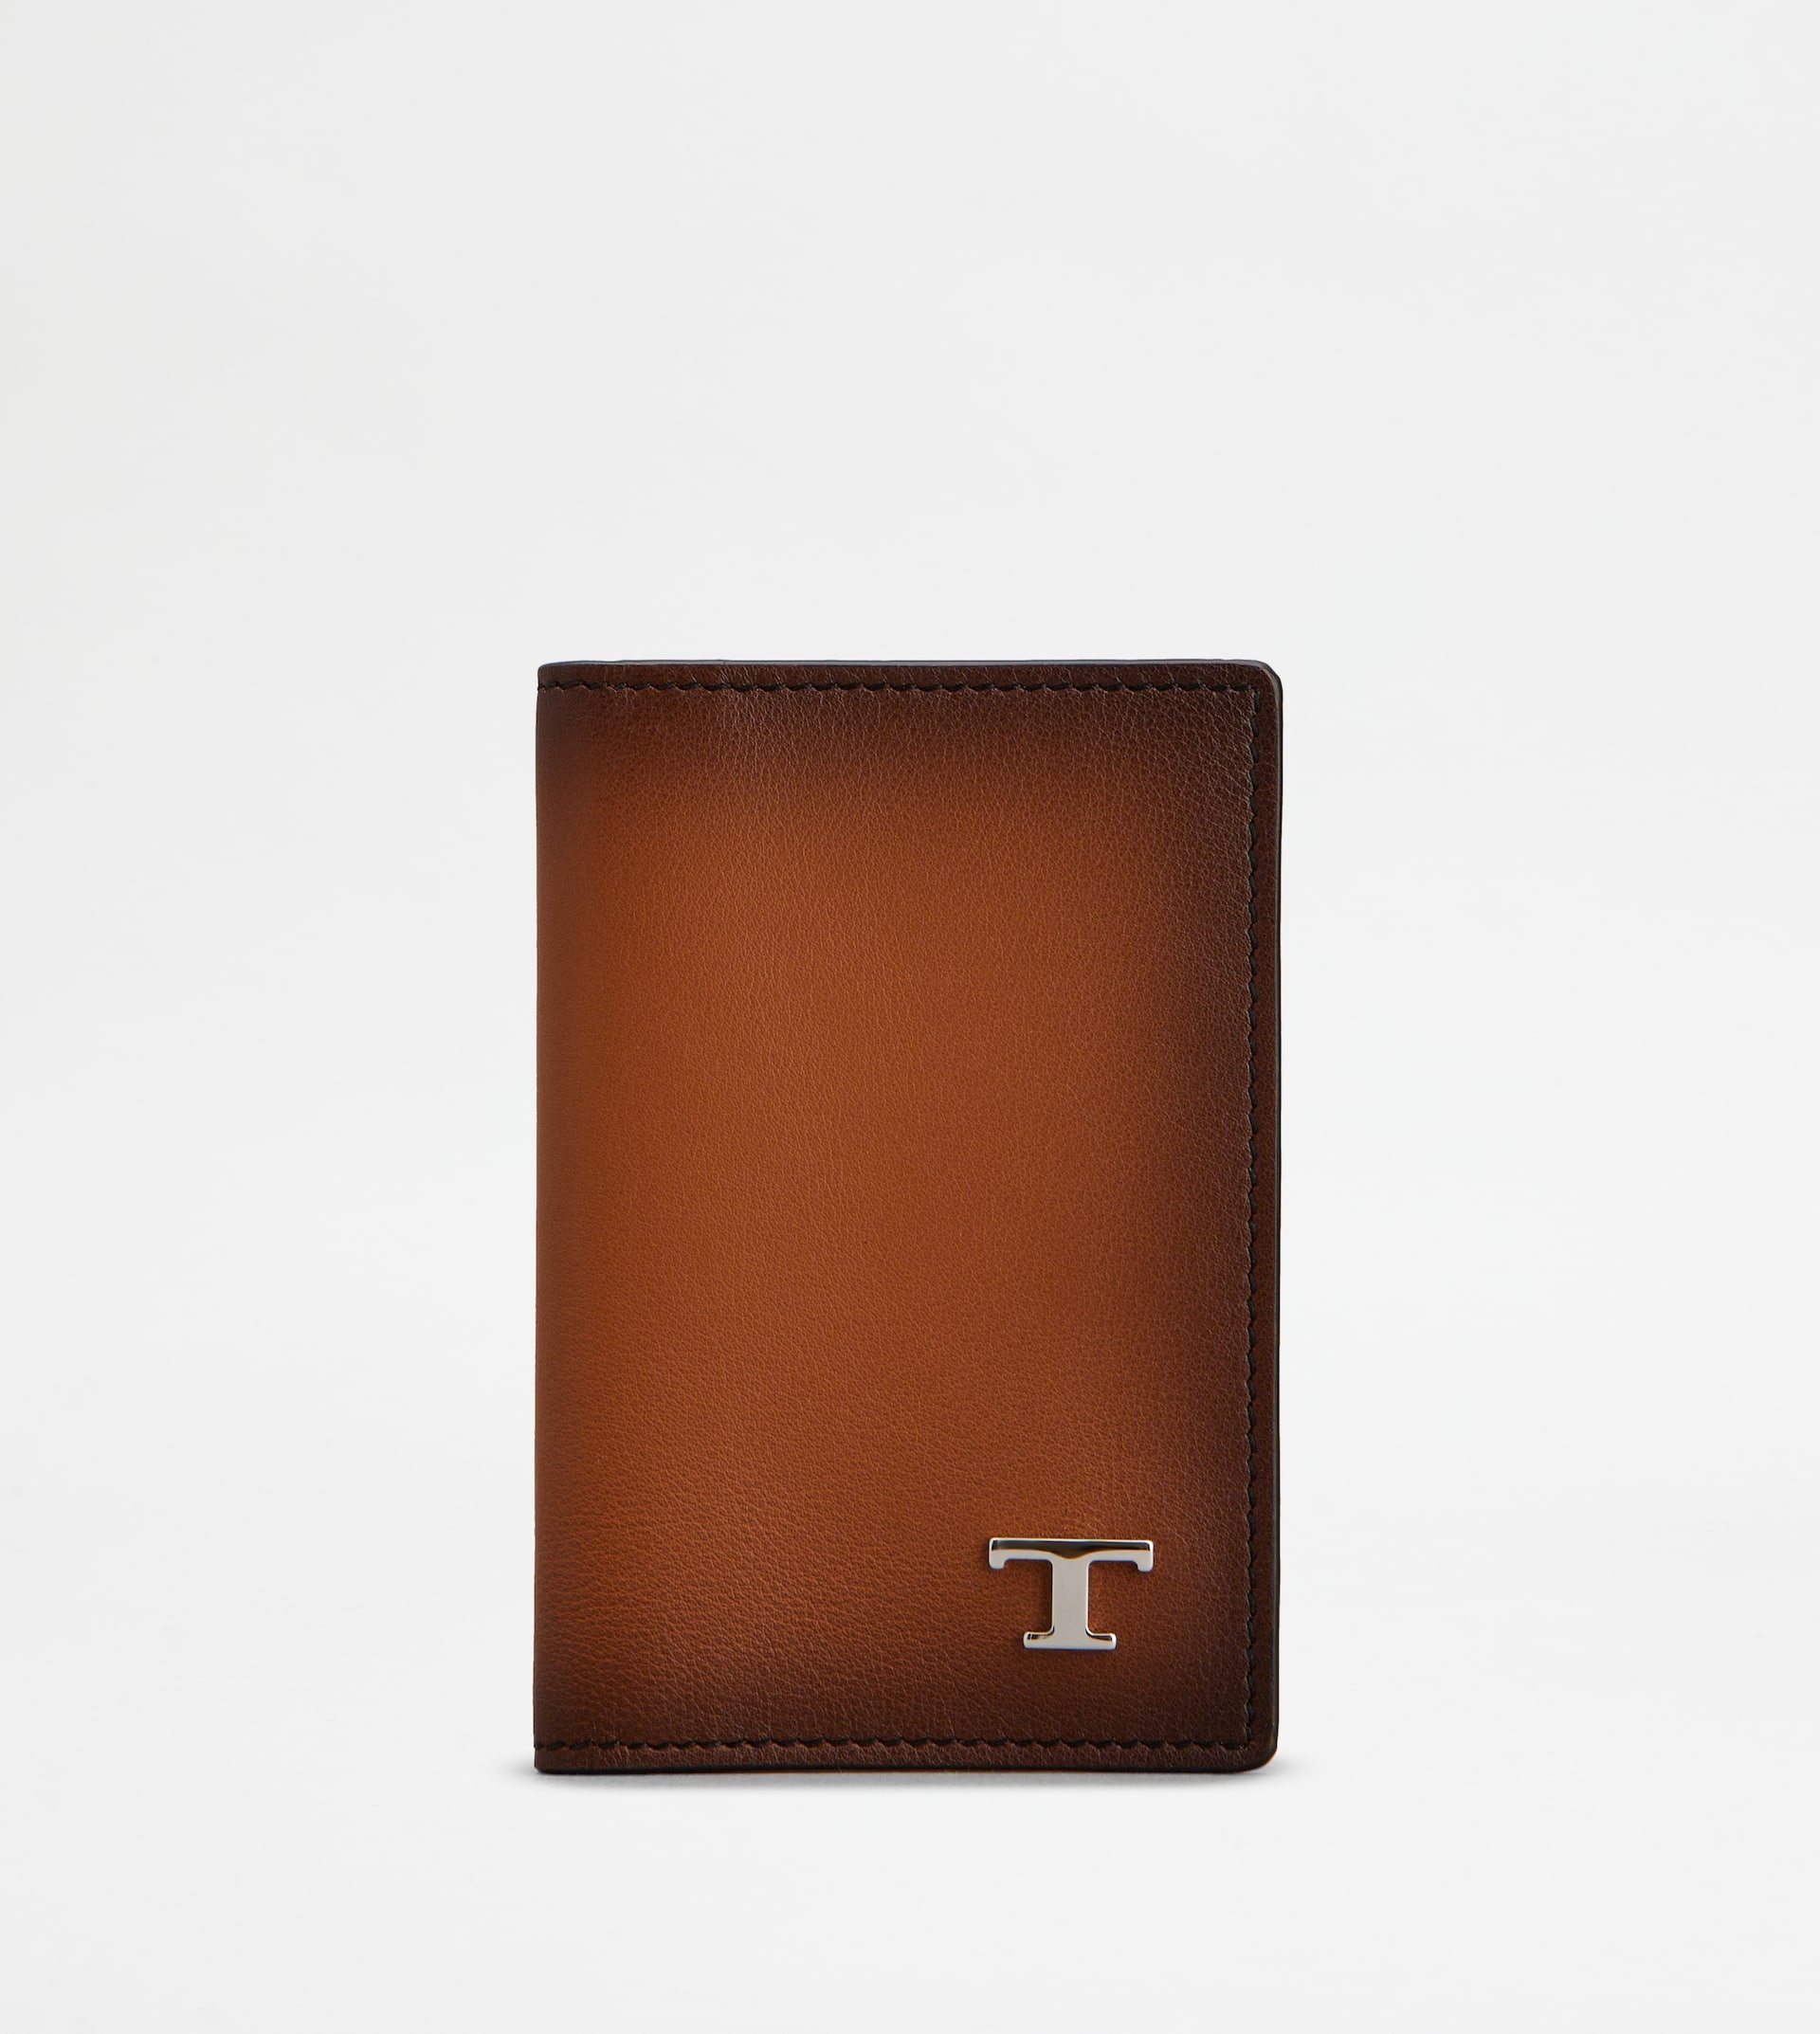 CARD HOLDER IN LEATHER - BROWN - 1